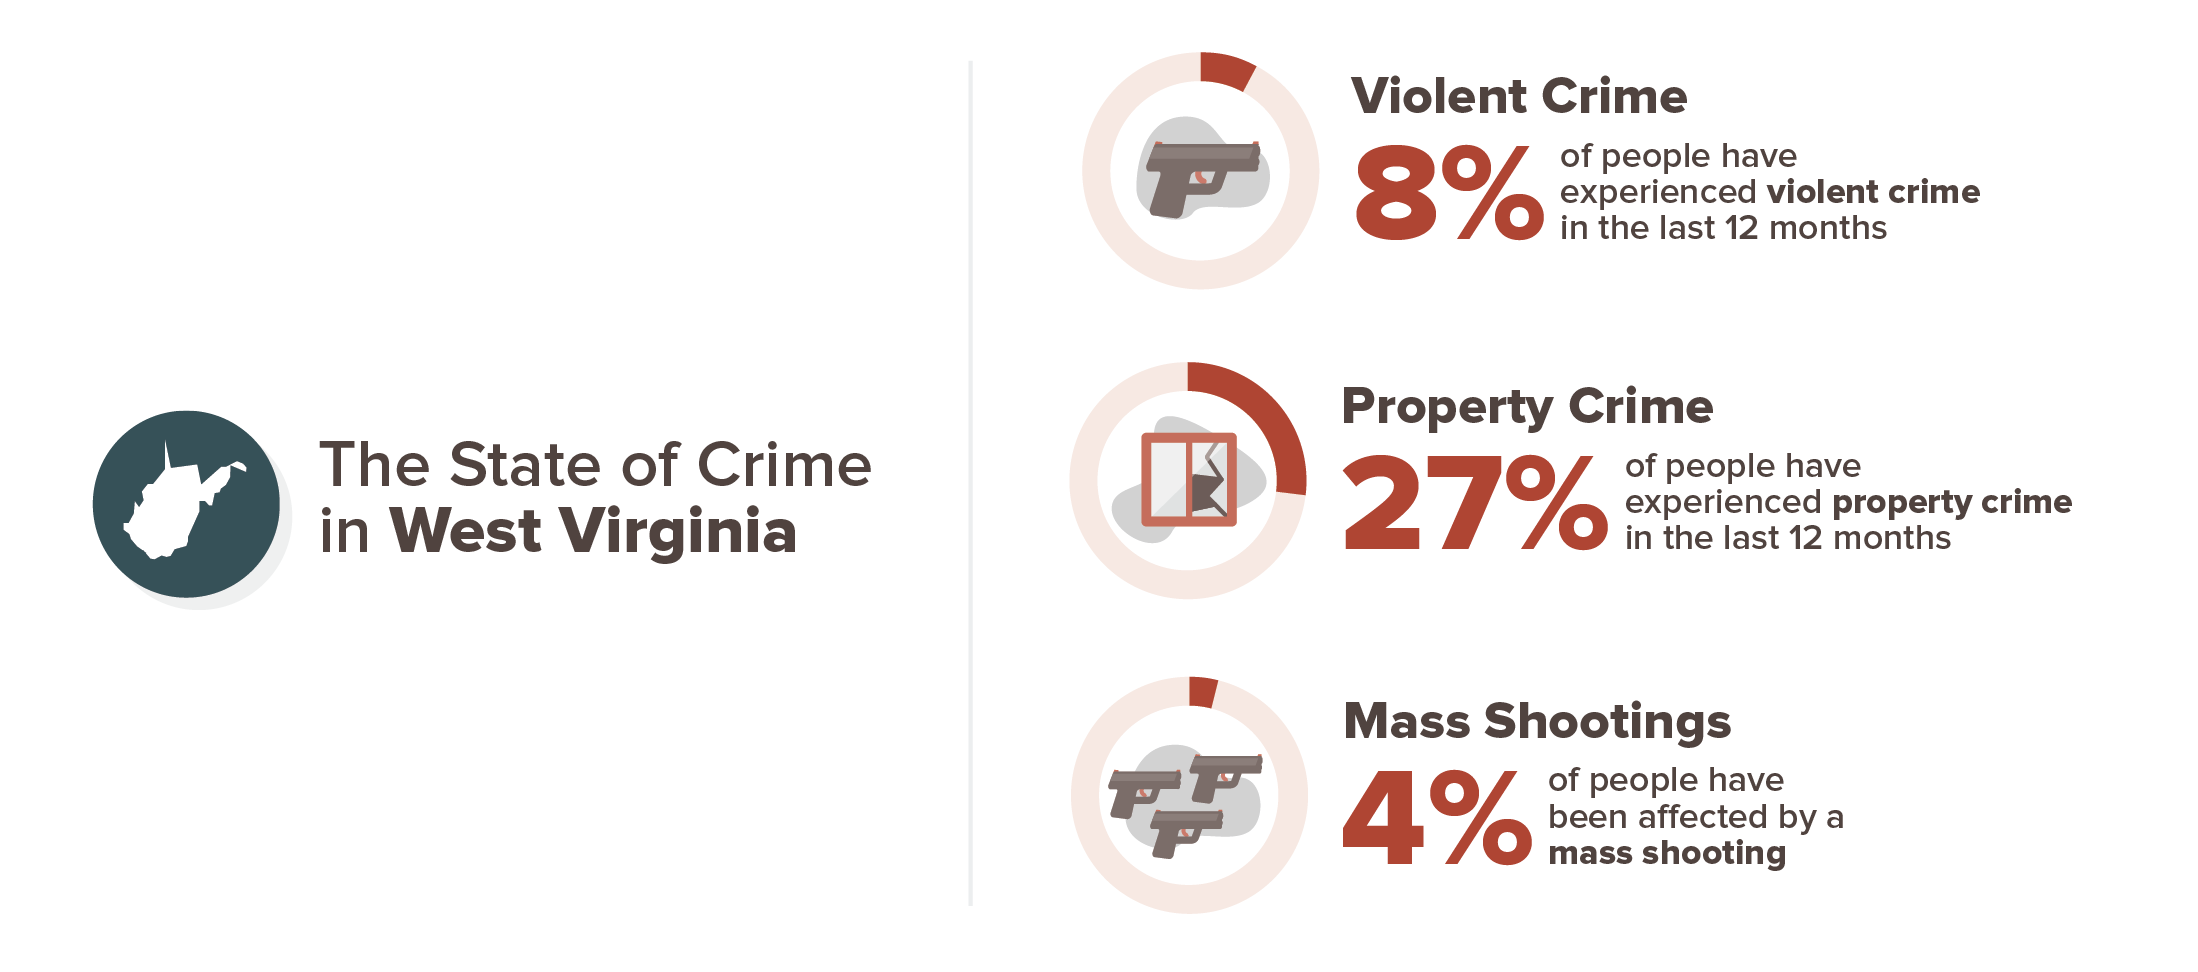 West Virginia crime experience infographic